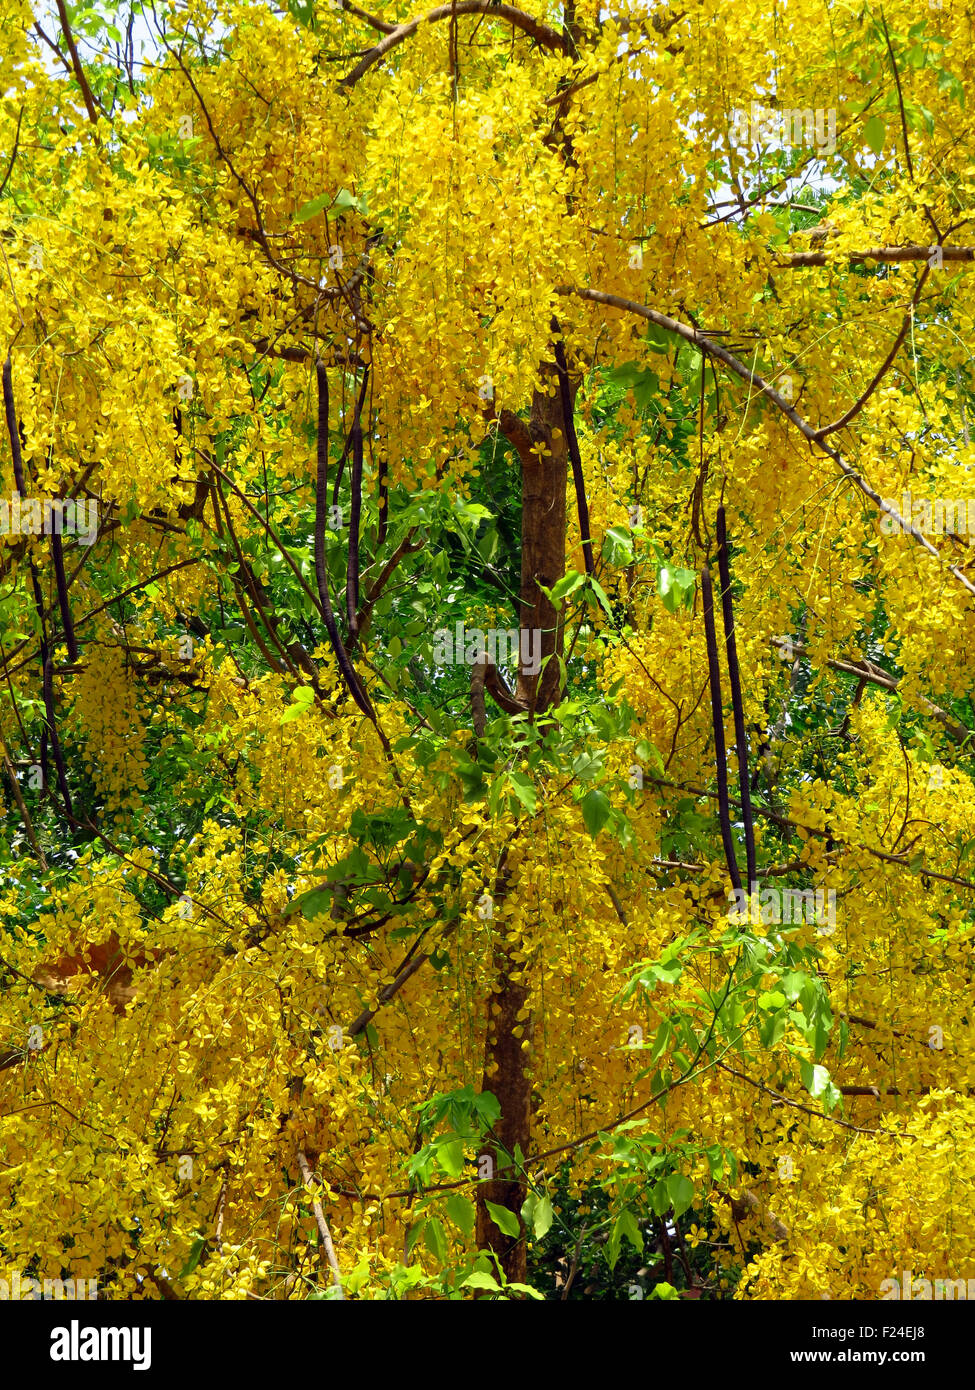 The beautiful Golden Shower Cassia tree with yellow flowers also known as Cassia Fistula, bloomed in the summers of India. Stock Photo